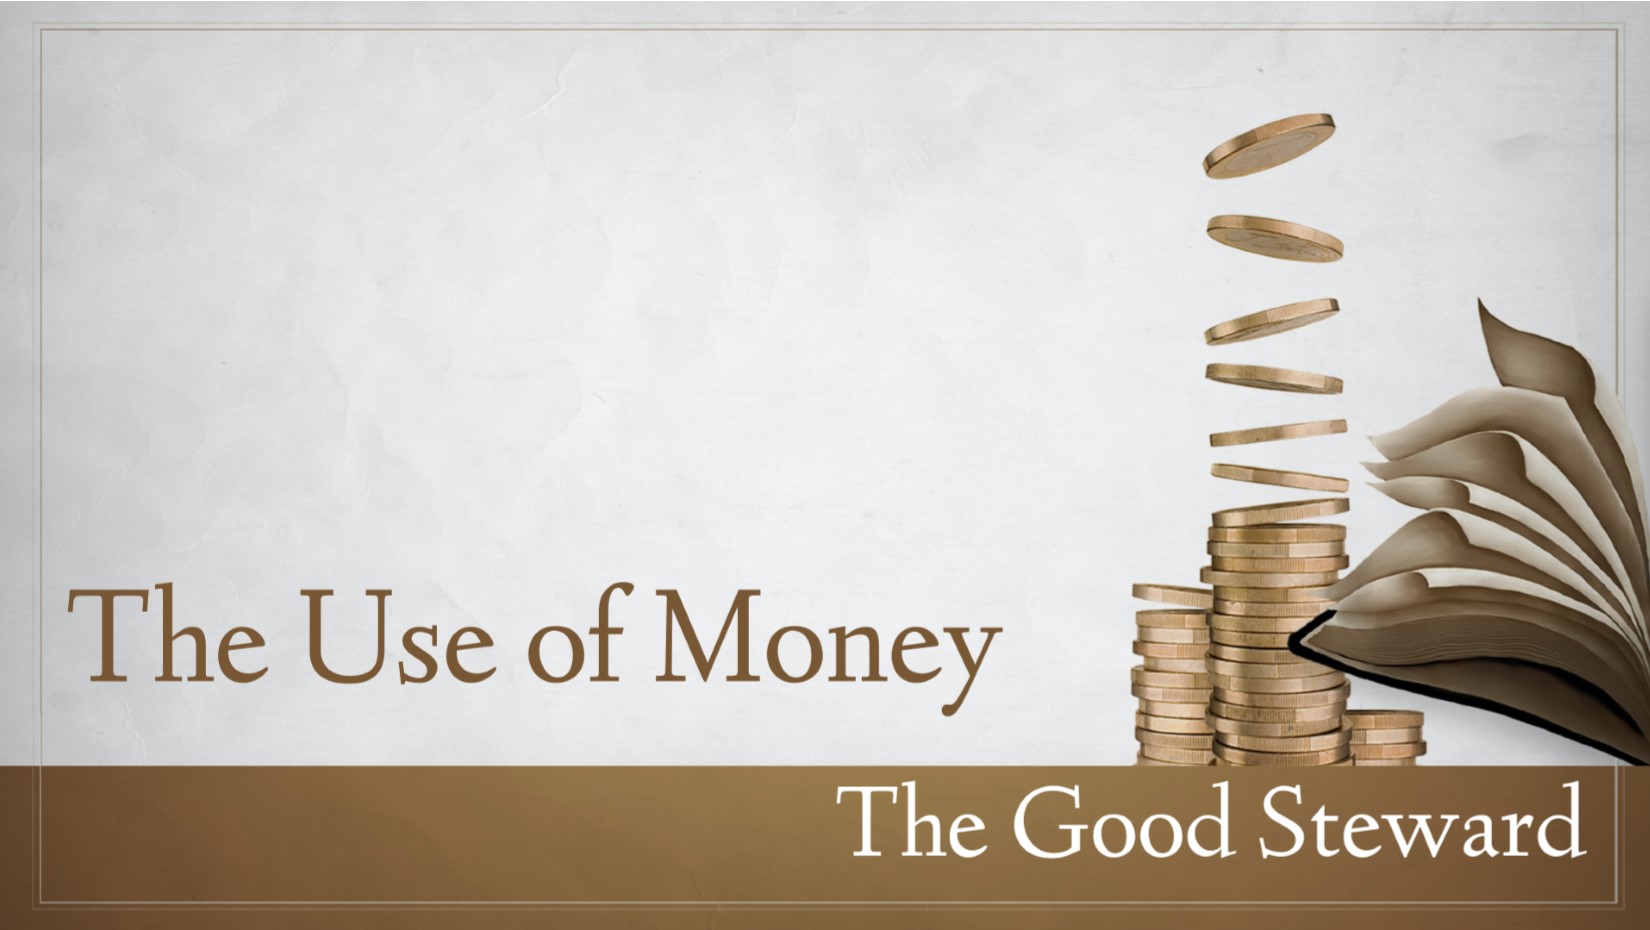 11.22.2020 The Use Of Money: The Good Steward